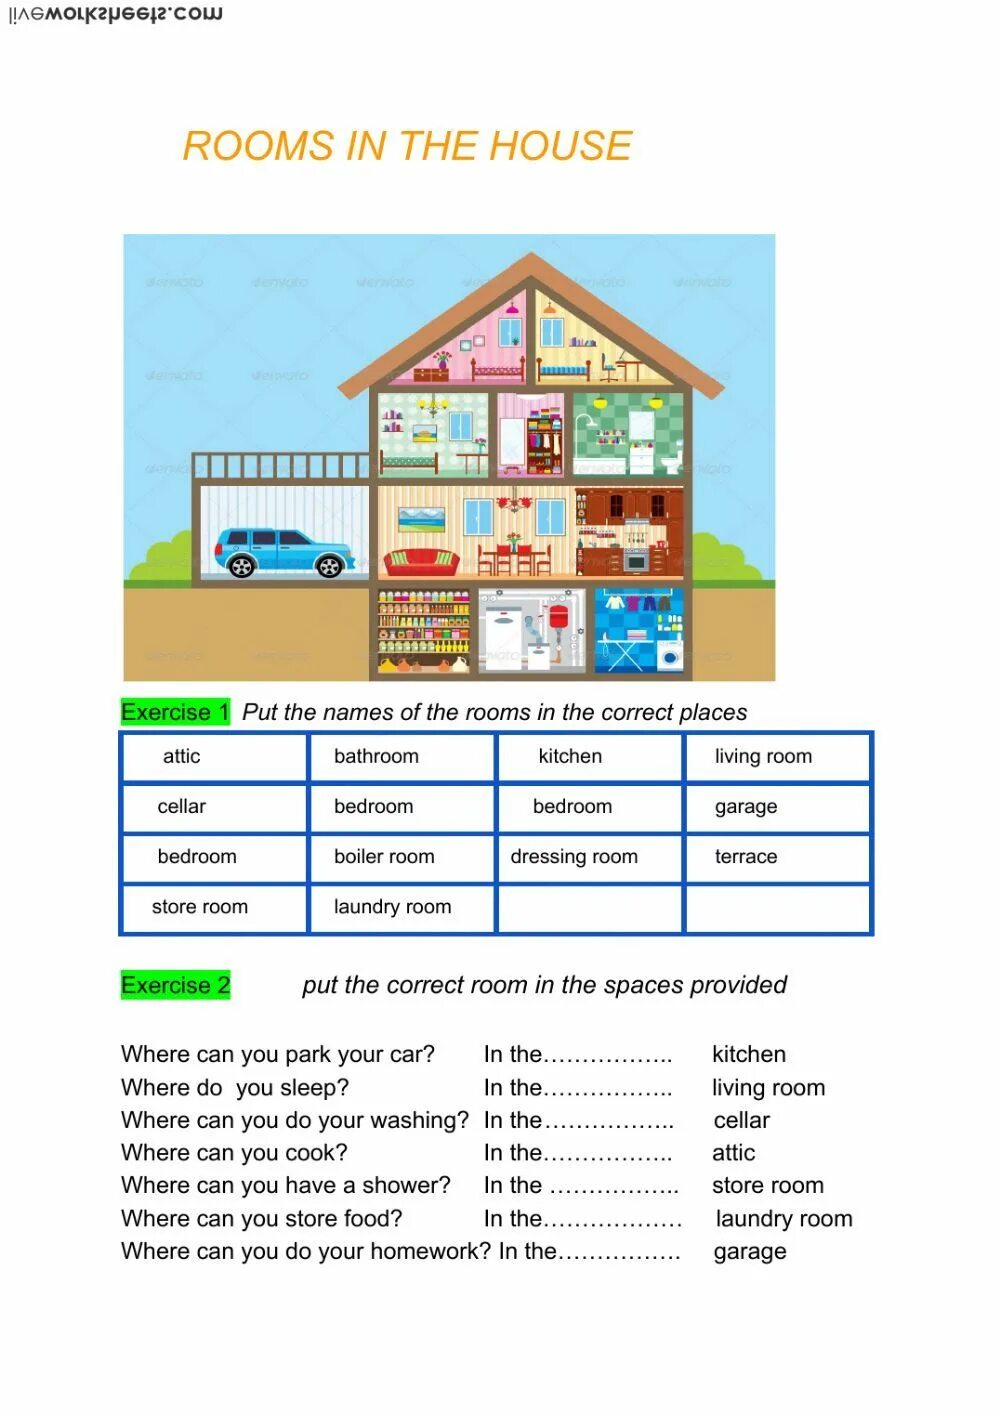 Дом Worksheets. Комнаты Worksheets for Kids. Английский House Rooms Worksheet. Мой дом Worksheets.